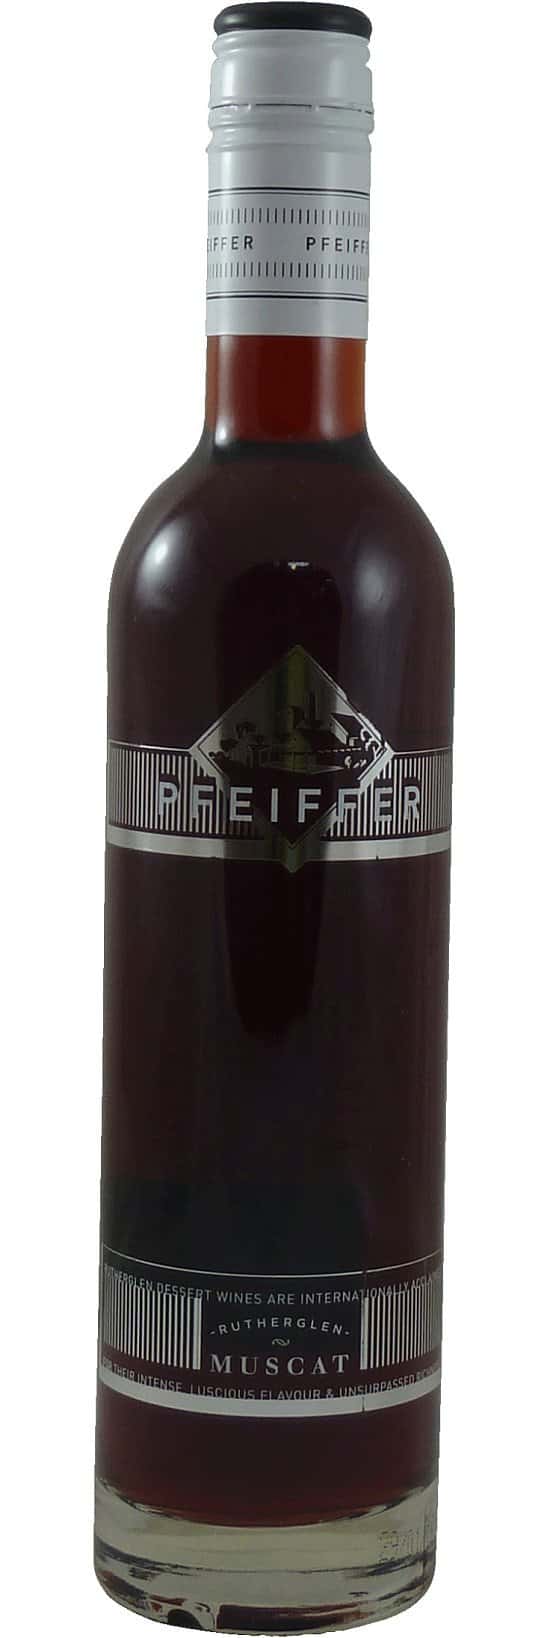 View more Wines and Ports online - Including our Pfeiffer Rutherglen Muscat £16.96!